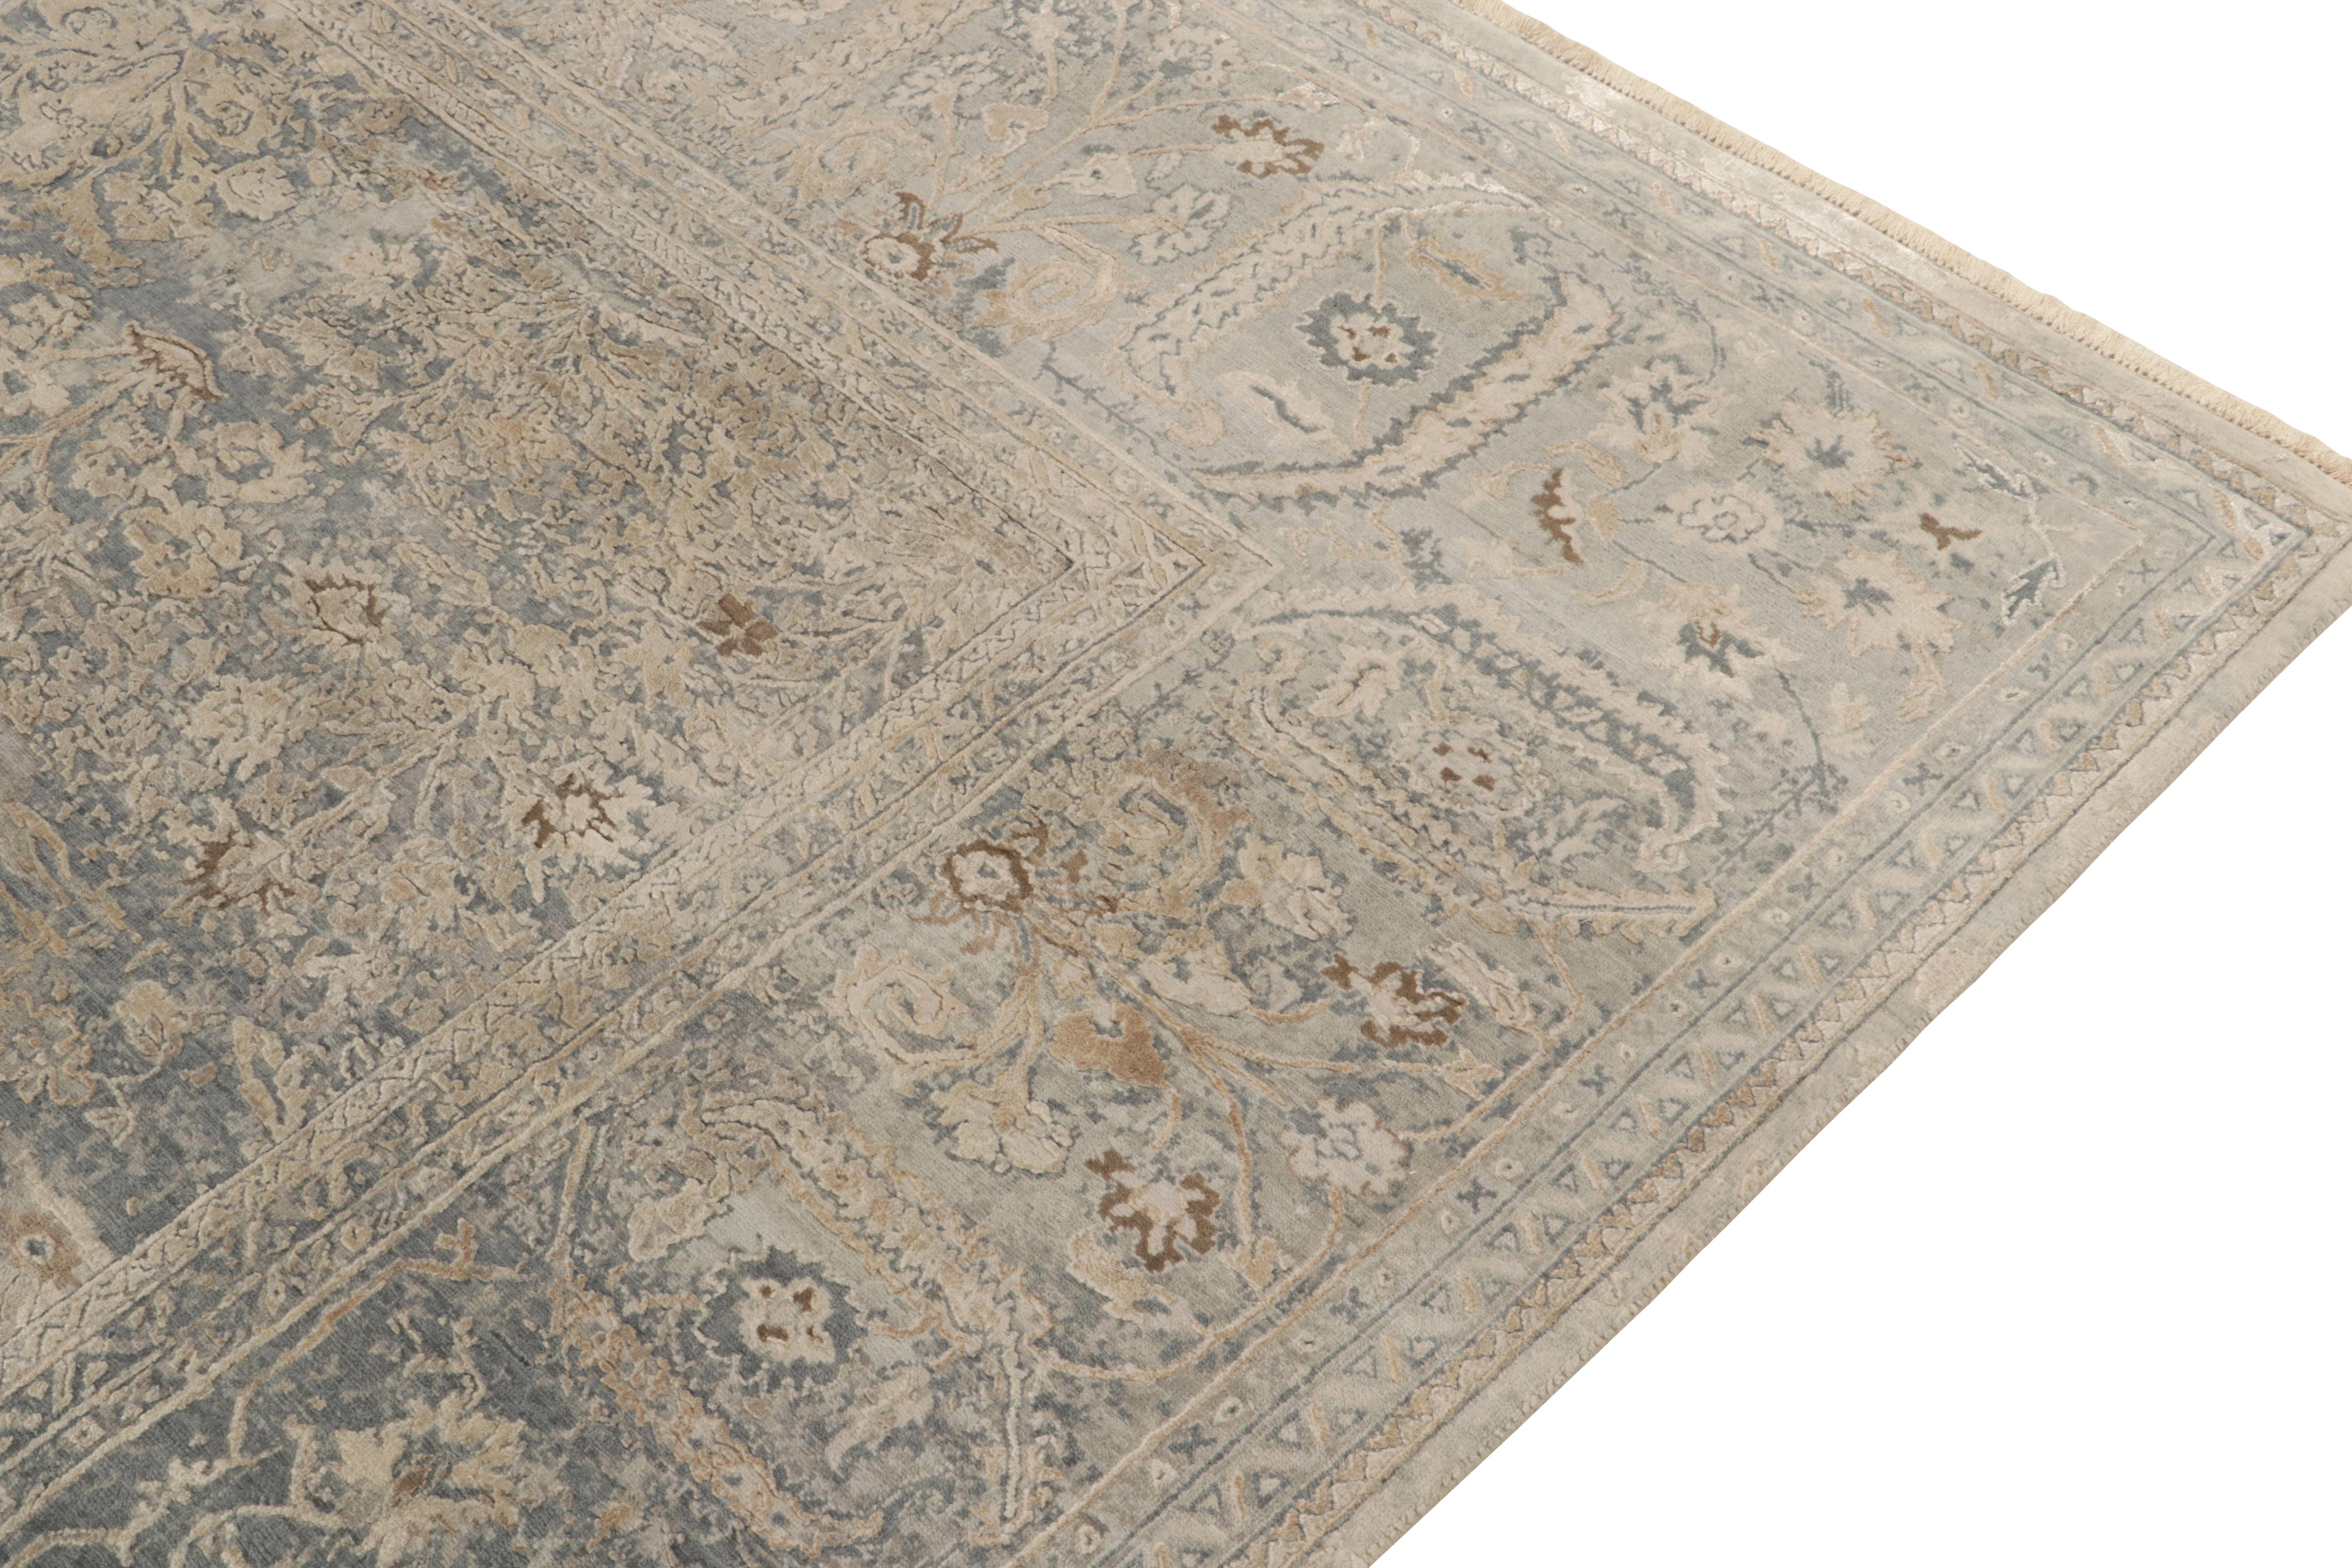 Rug & Kilim’s Classic Style Rug in Silver-Gray, Blue & Beige Floral Pattern In New Condition For Sale In Long Island City, NY